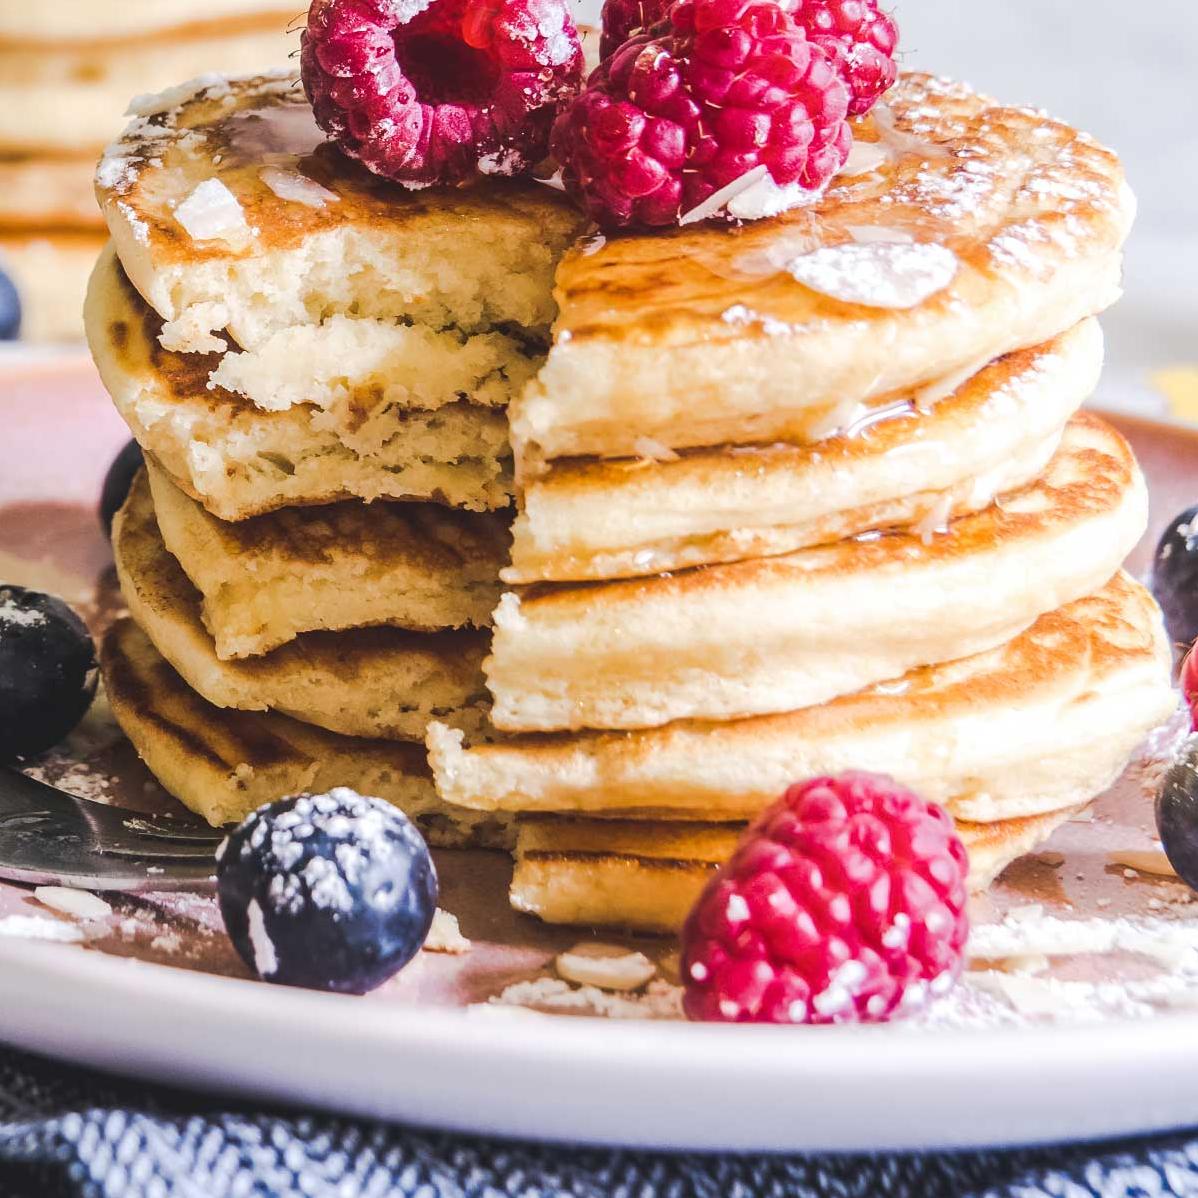  The aroma of these pancakes will make your kitchen smell heavenly.